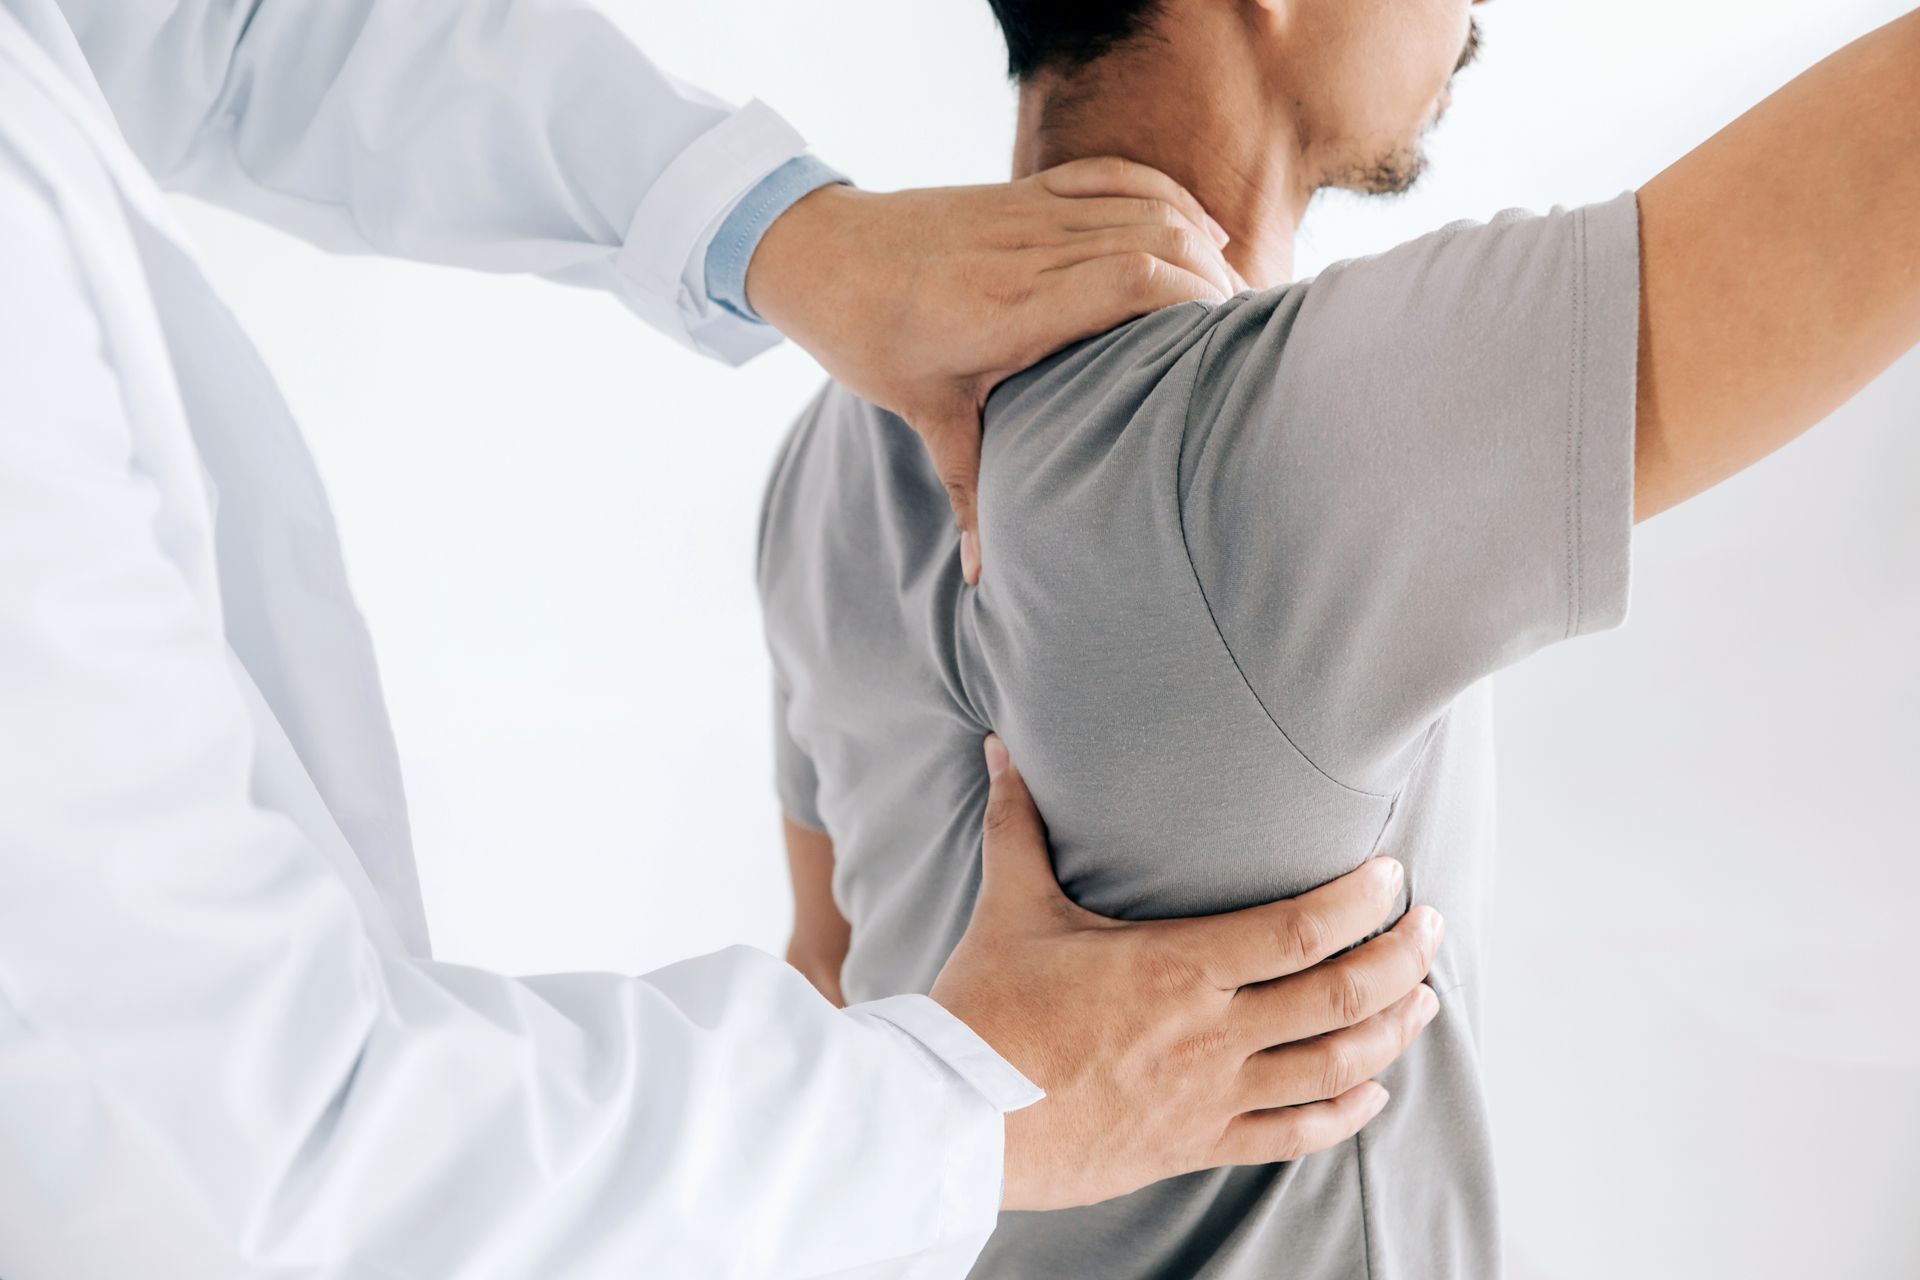 Chiropractic spinal care